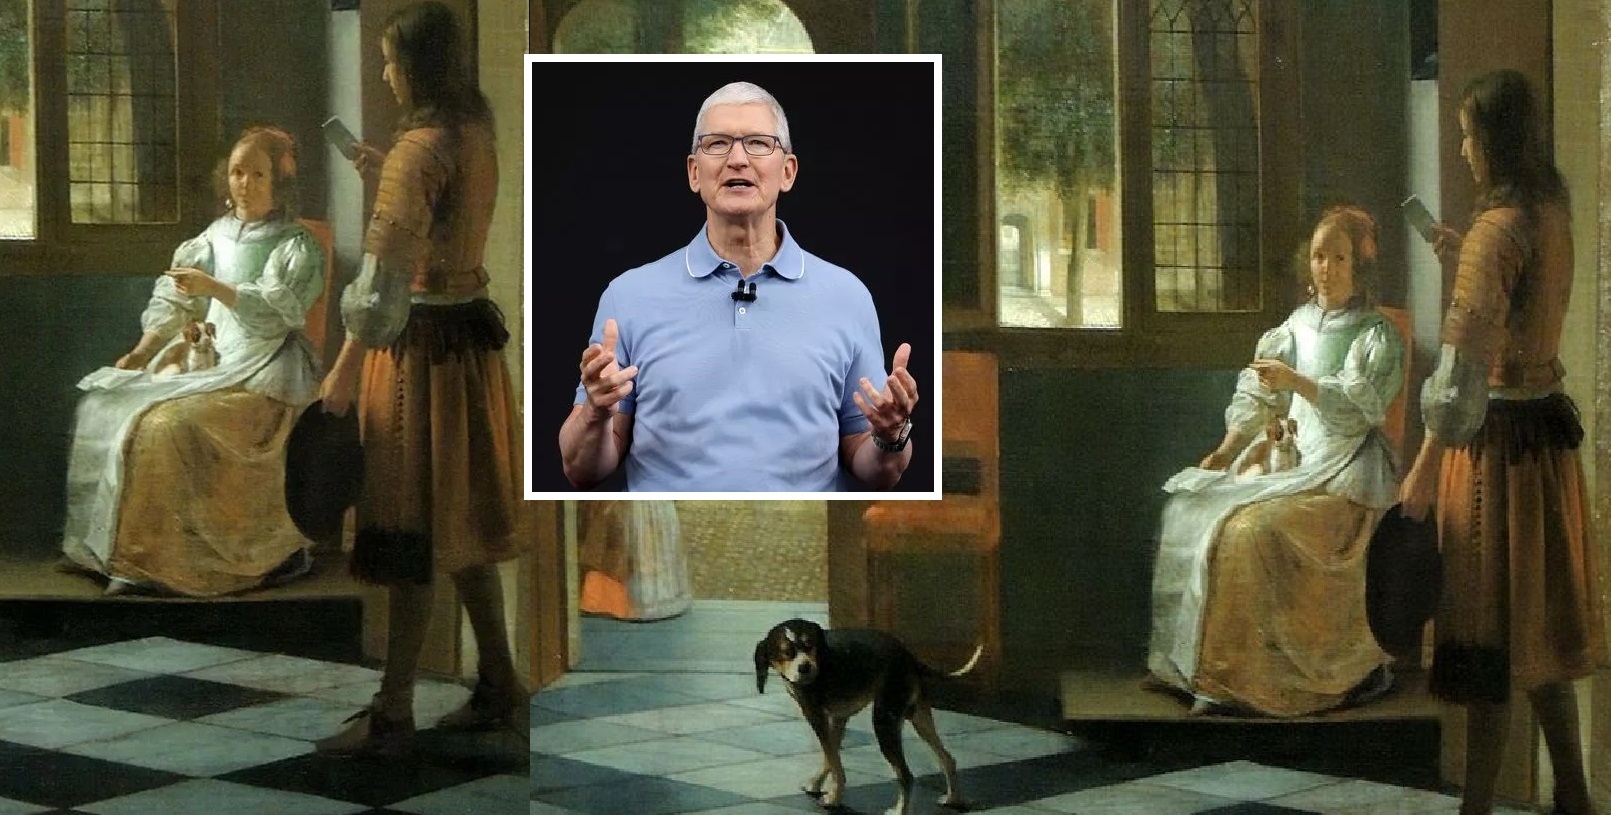 iPhone spotted in 350 year old painting stumped Apple CEO Time travel may be possible